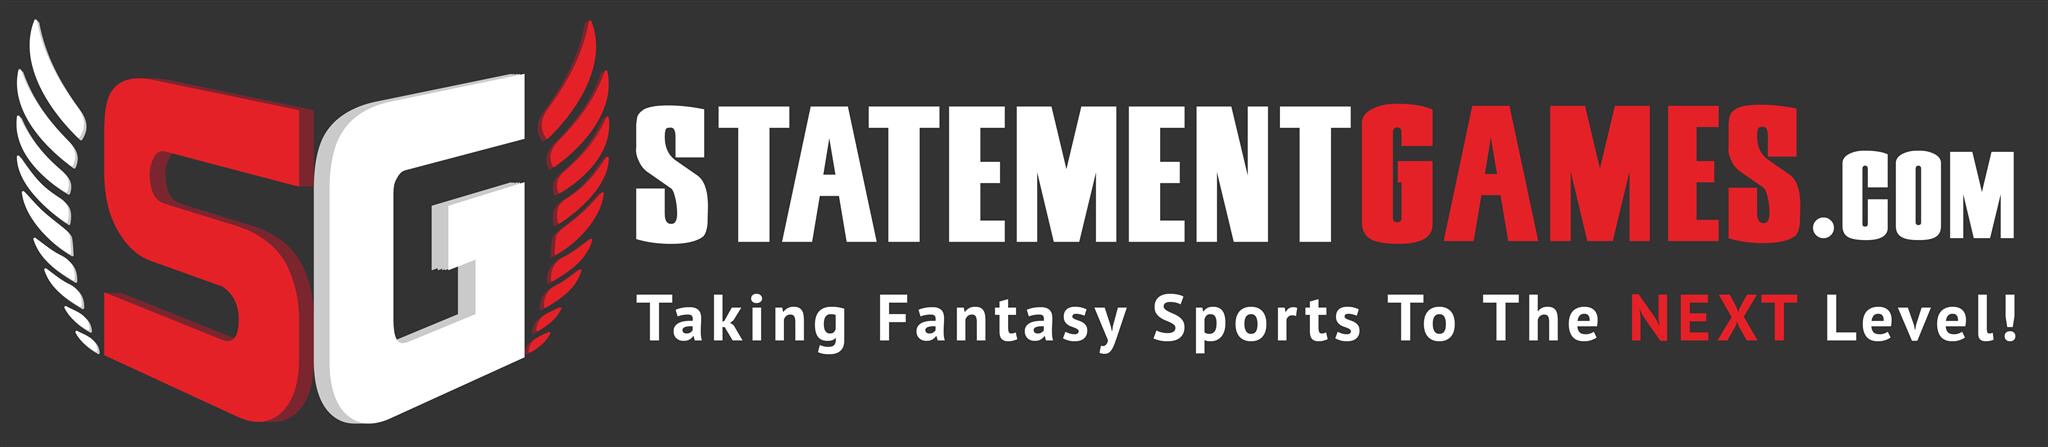 StatementGames Fantasy Sports – Fall 2018 Expectations